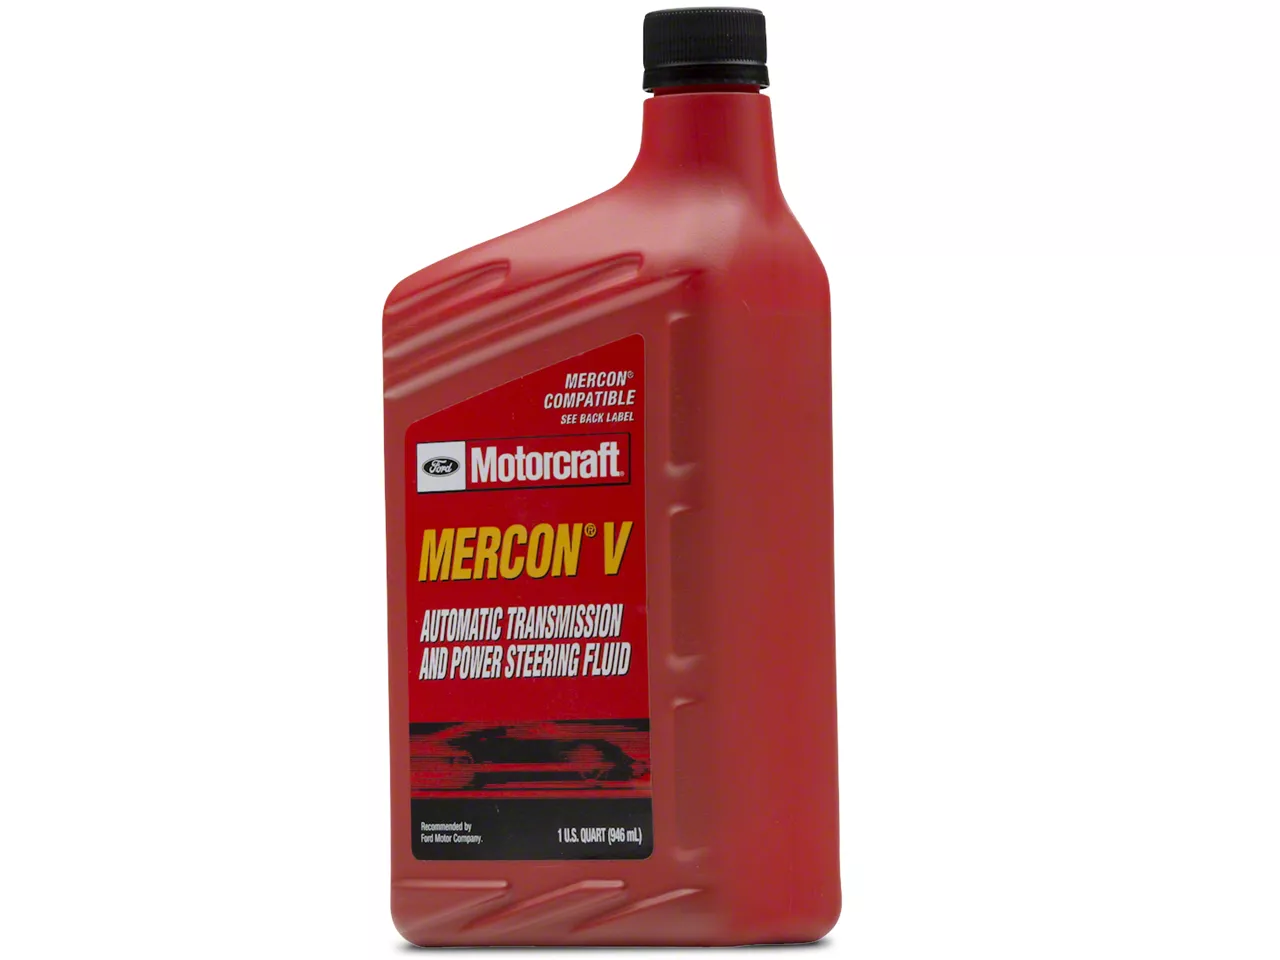 NEW Set of 8 Quarts Automatic Transmission Fluids Mercon-LV Genuine For Ford